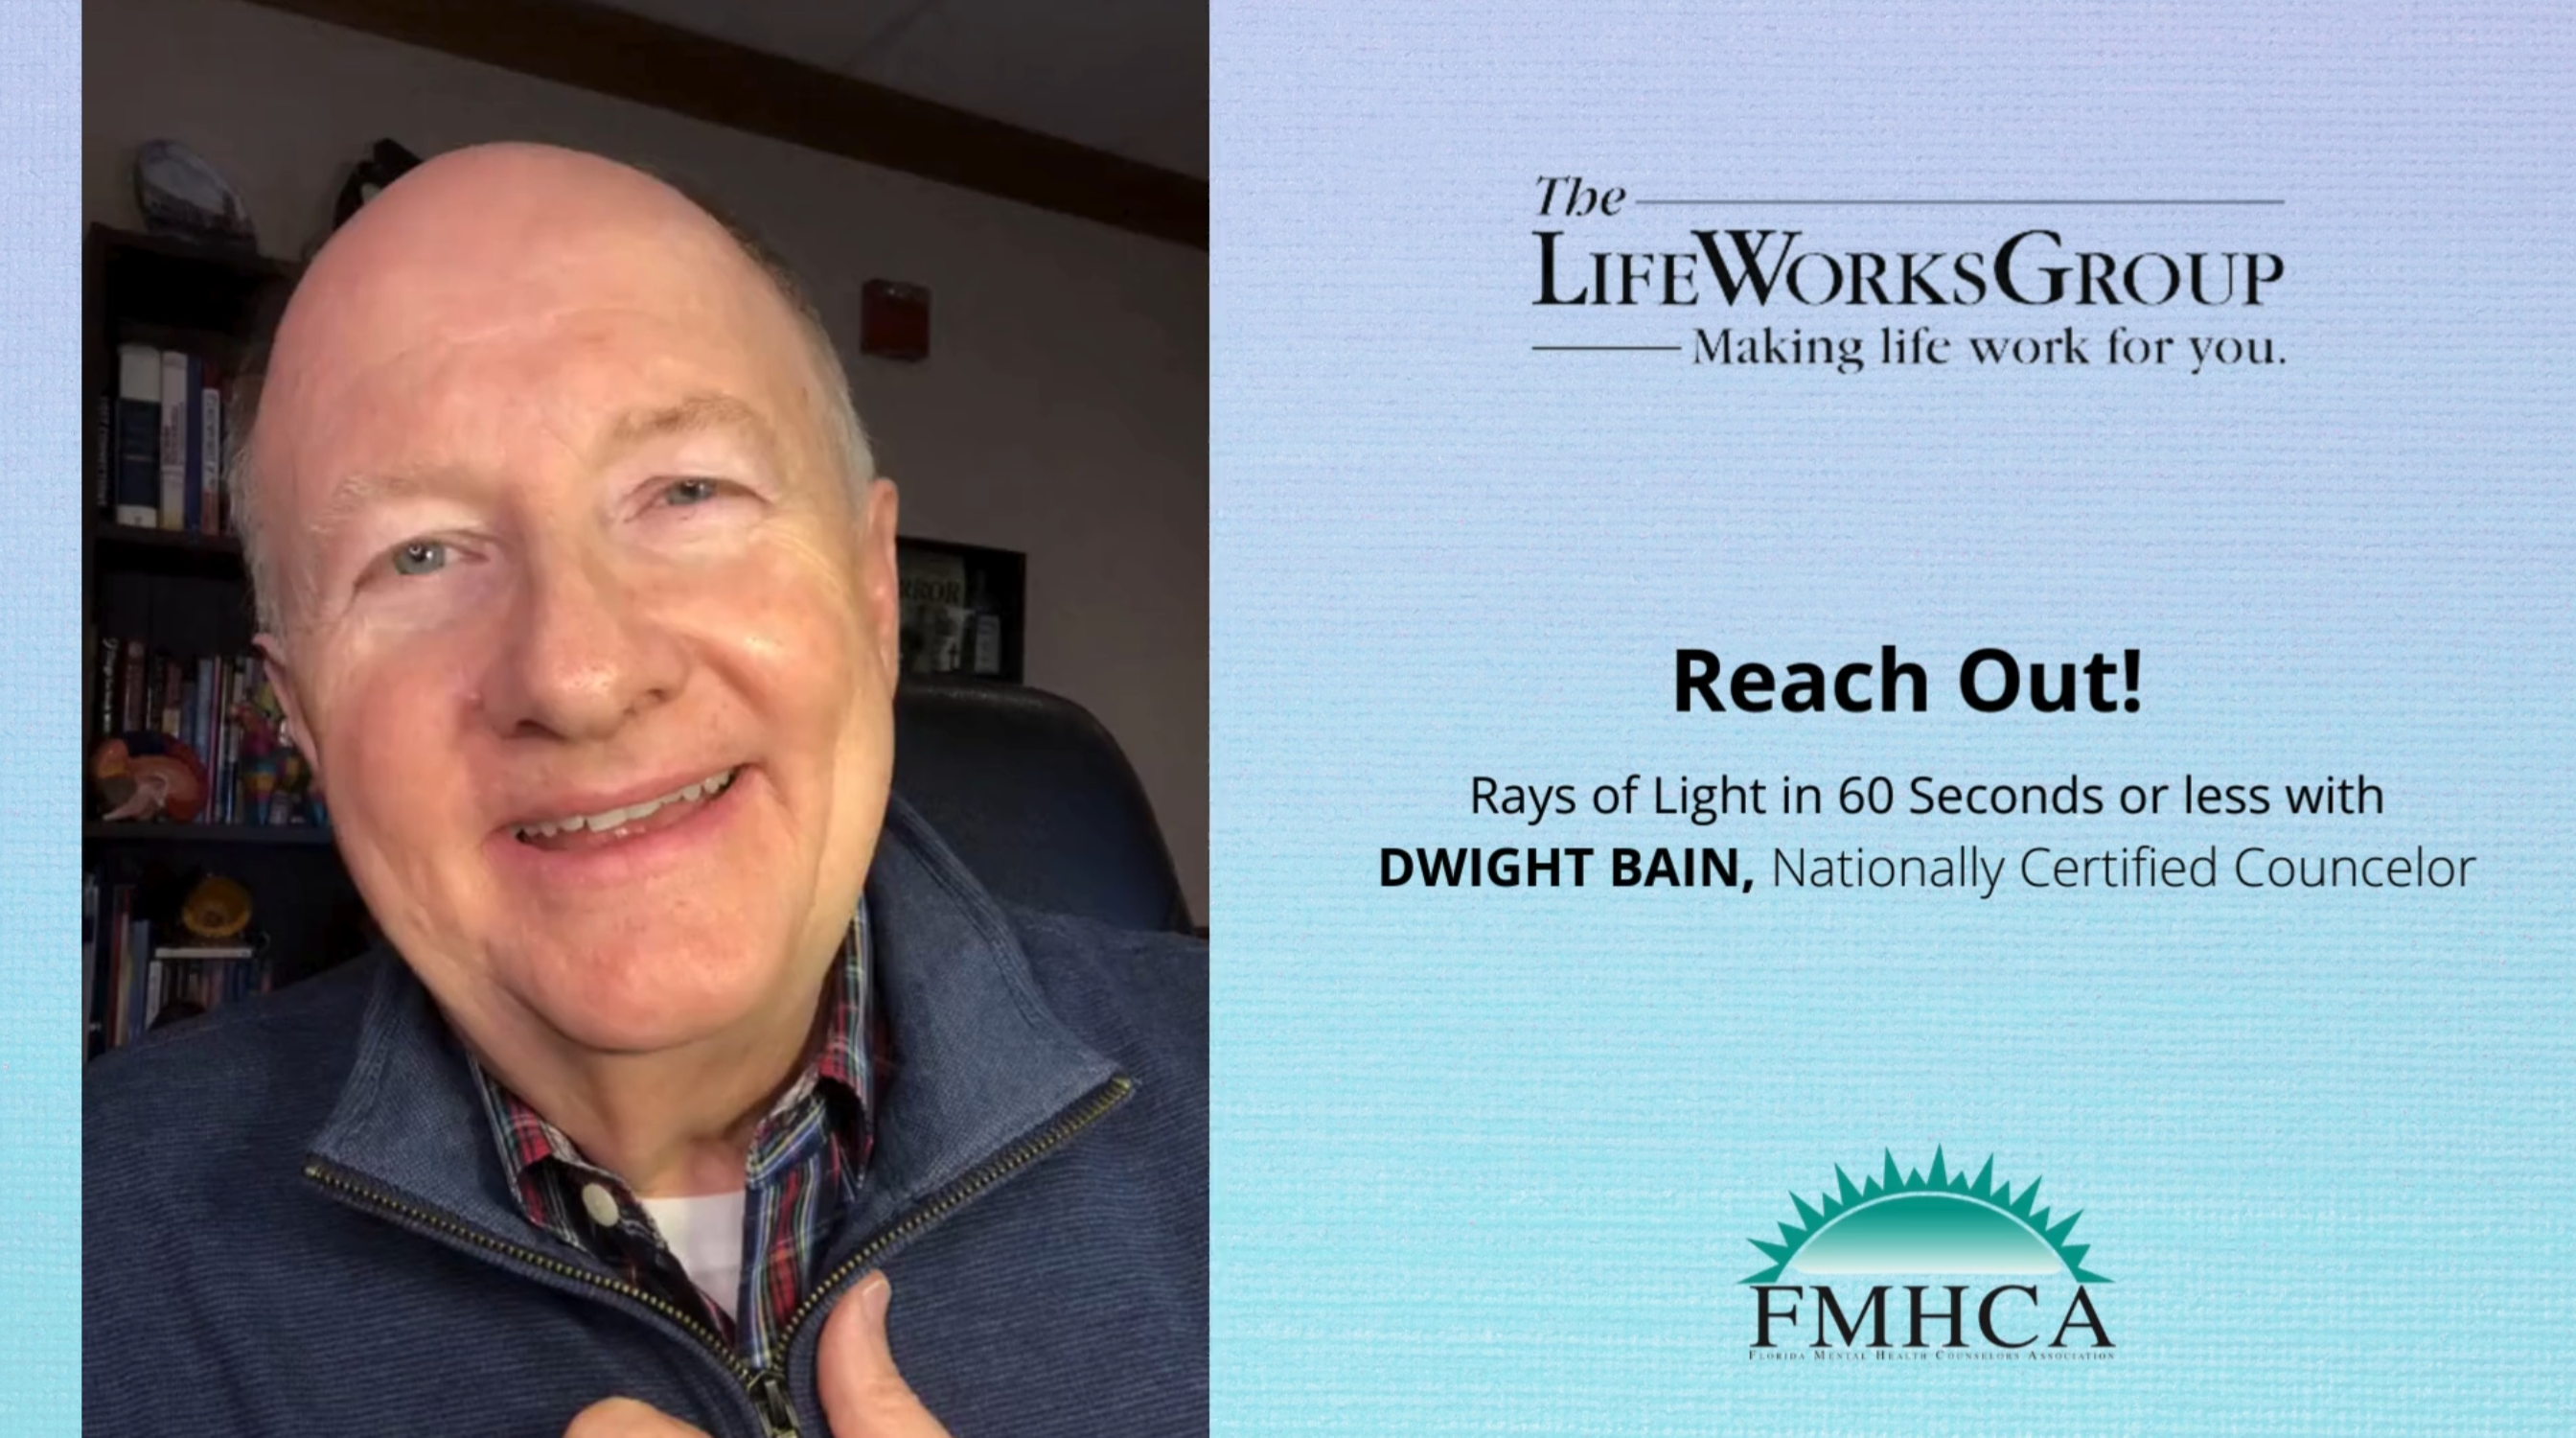 Ray of Light: Reach Out